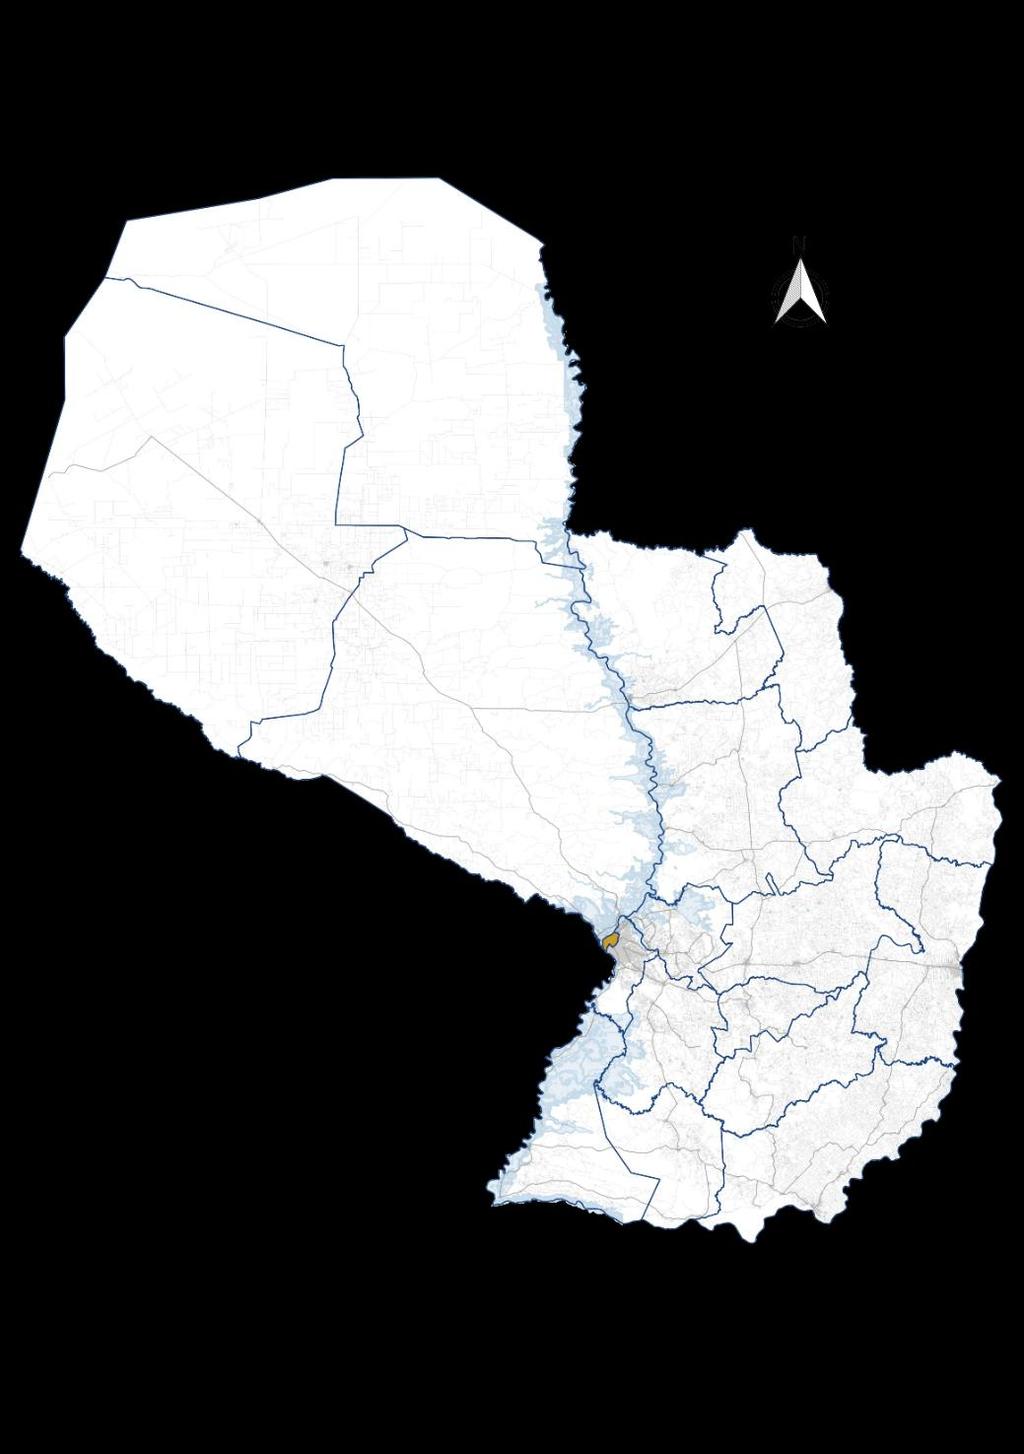 PARAGUAY PARAGUAY River Flooded to Level +63 3% OF THE POPULATION IN 60% OF THE TERRITORY IN THE CHACO REGION CIUDAD DEL ESTE 104 Km2 TOTAL AREA 293.